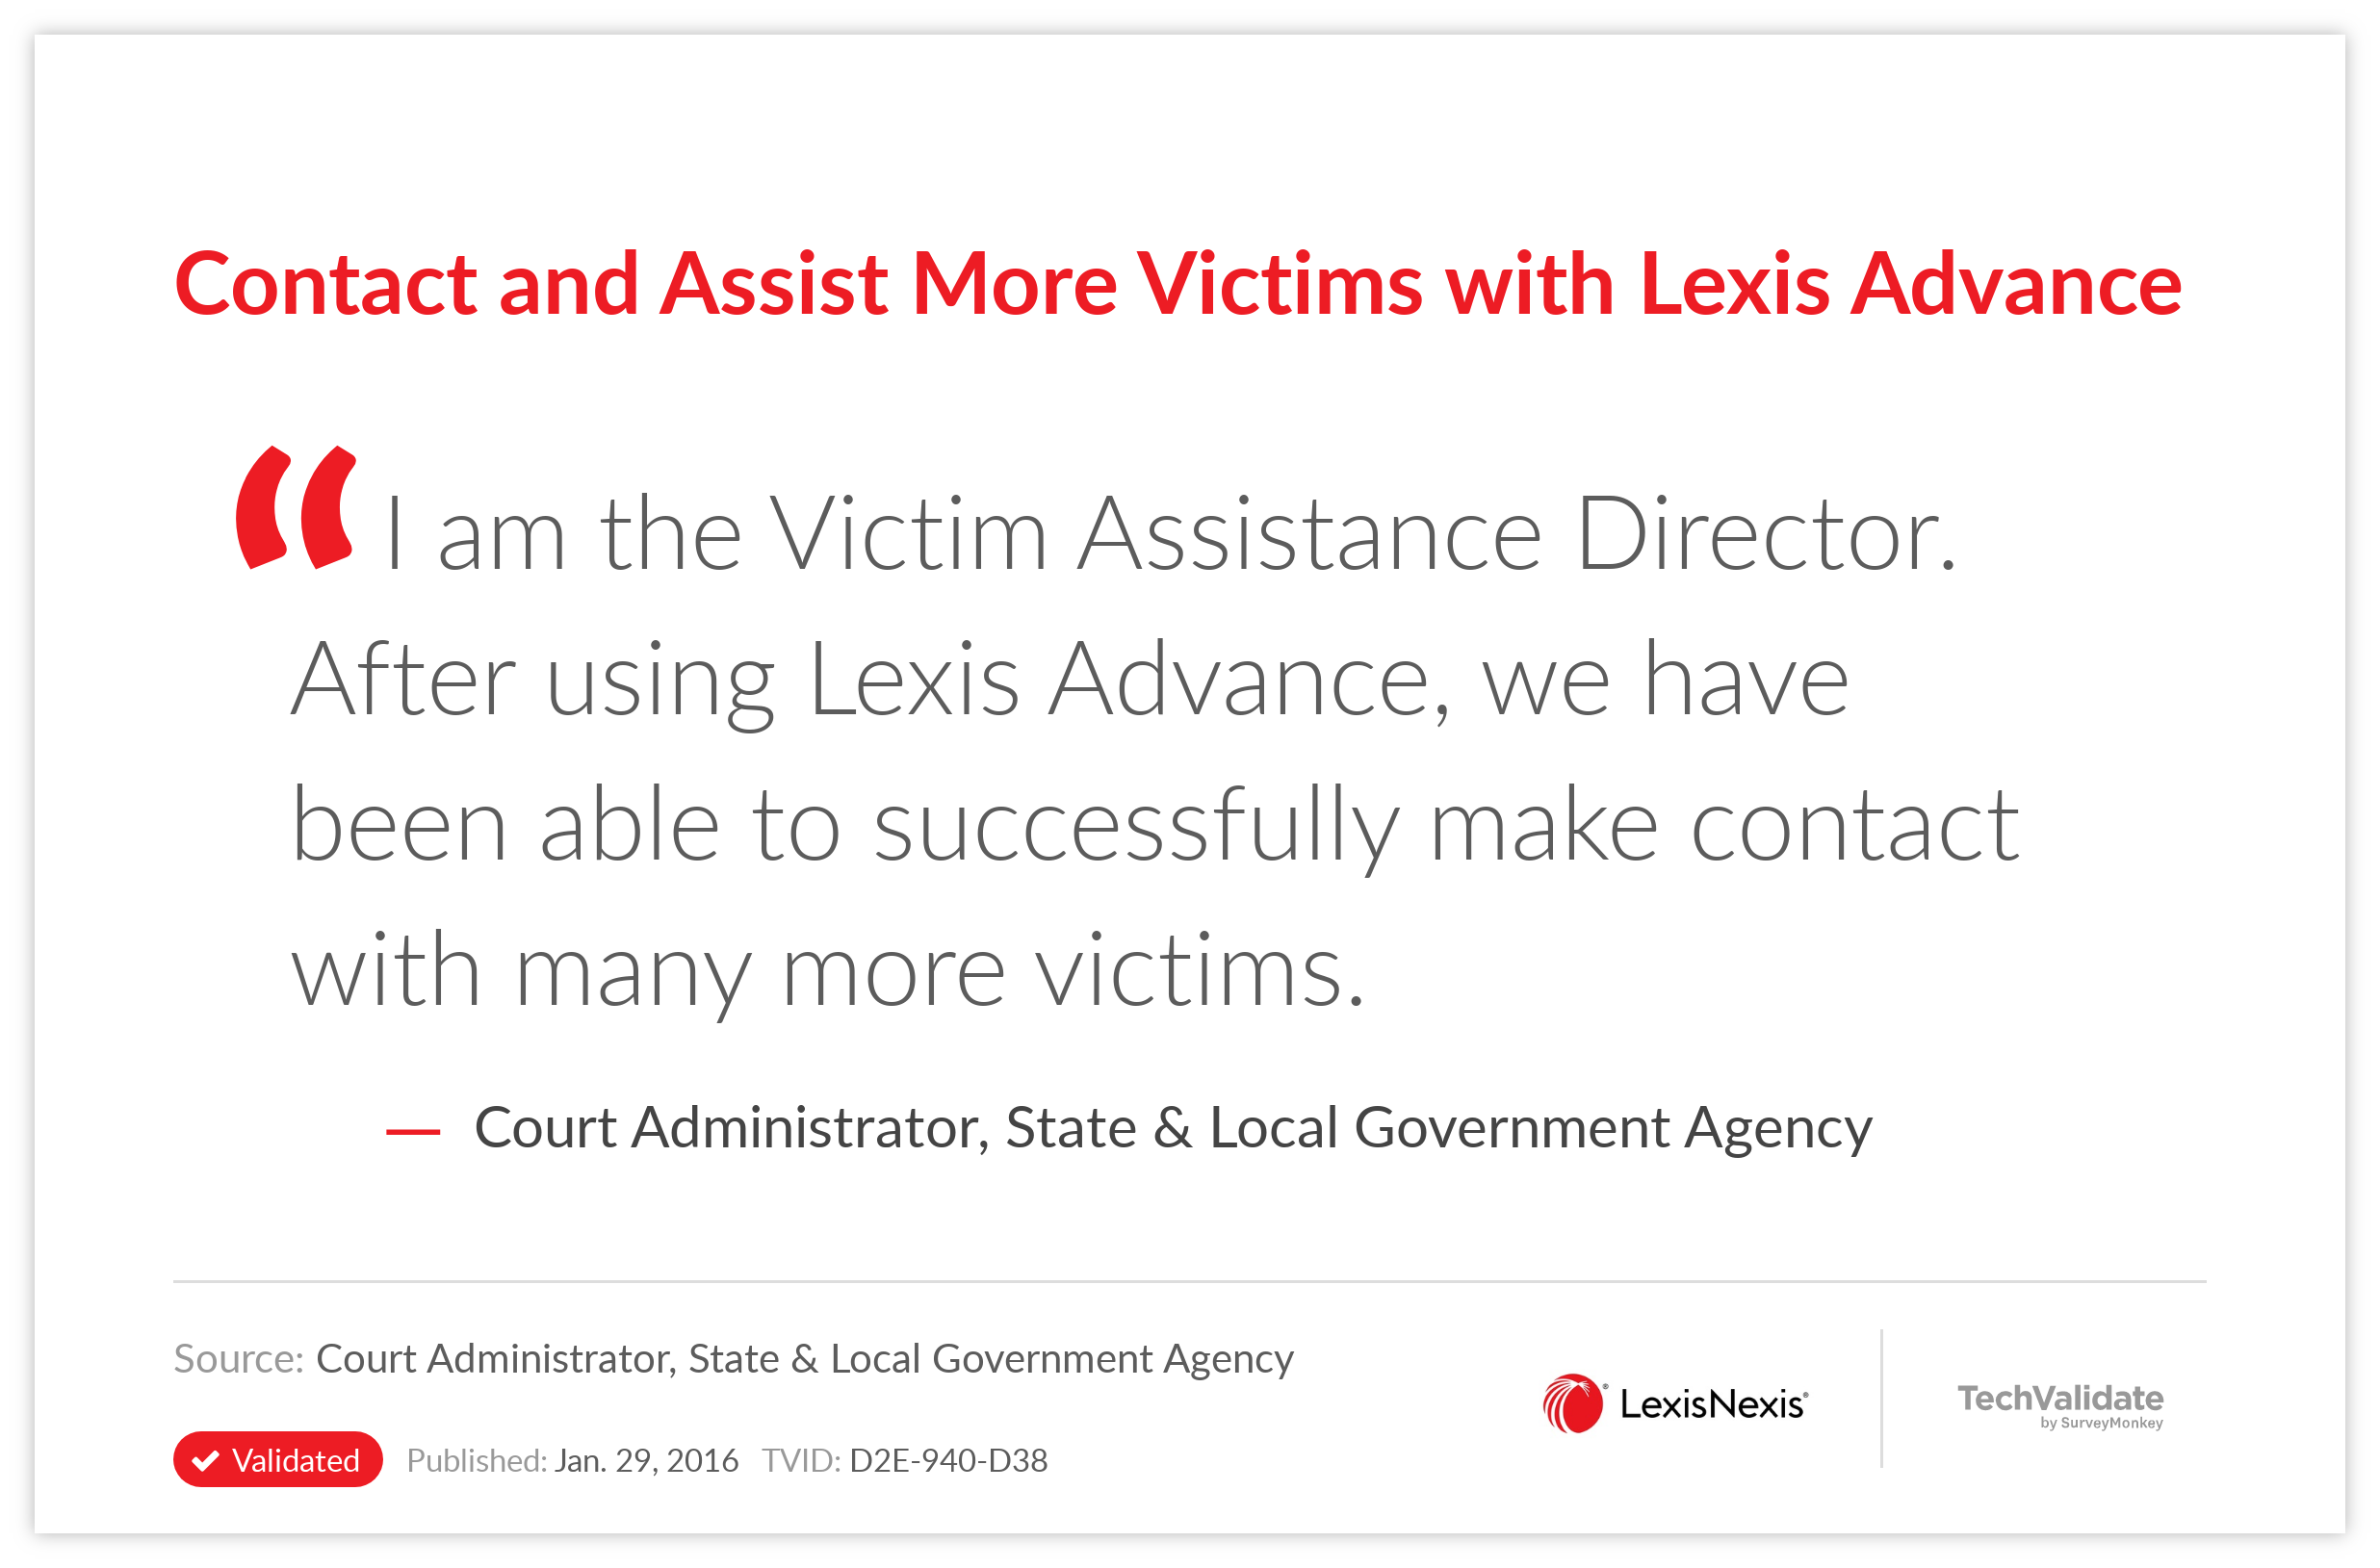 Contact and Assist More Victims with Lexis Advance